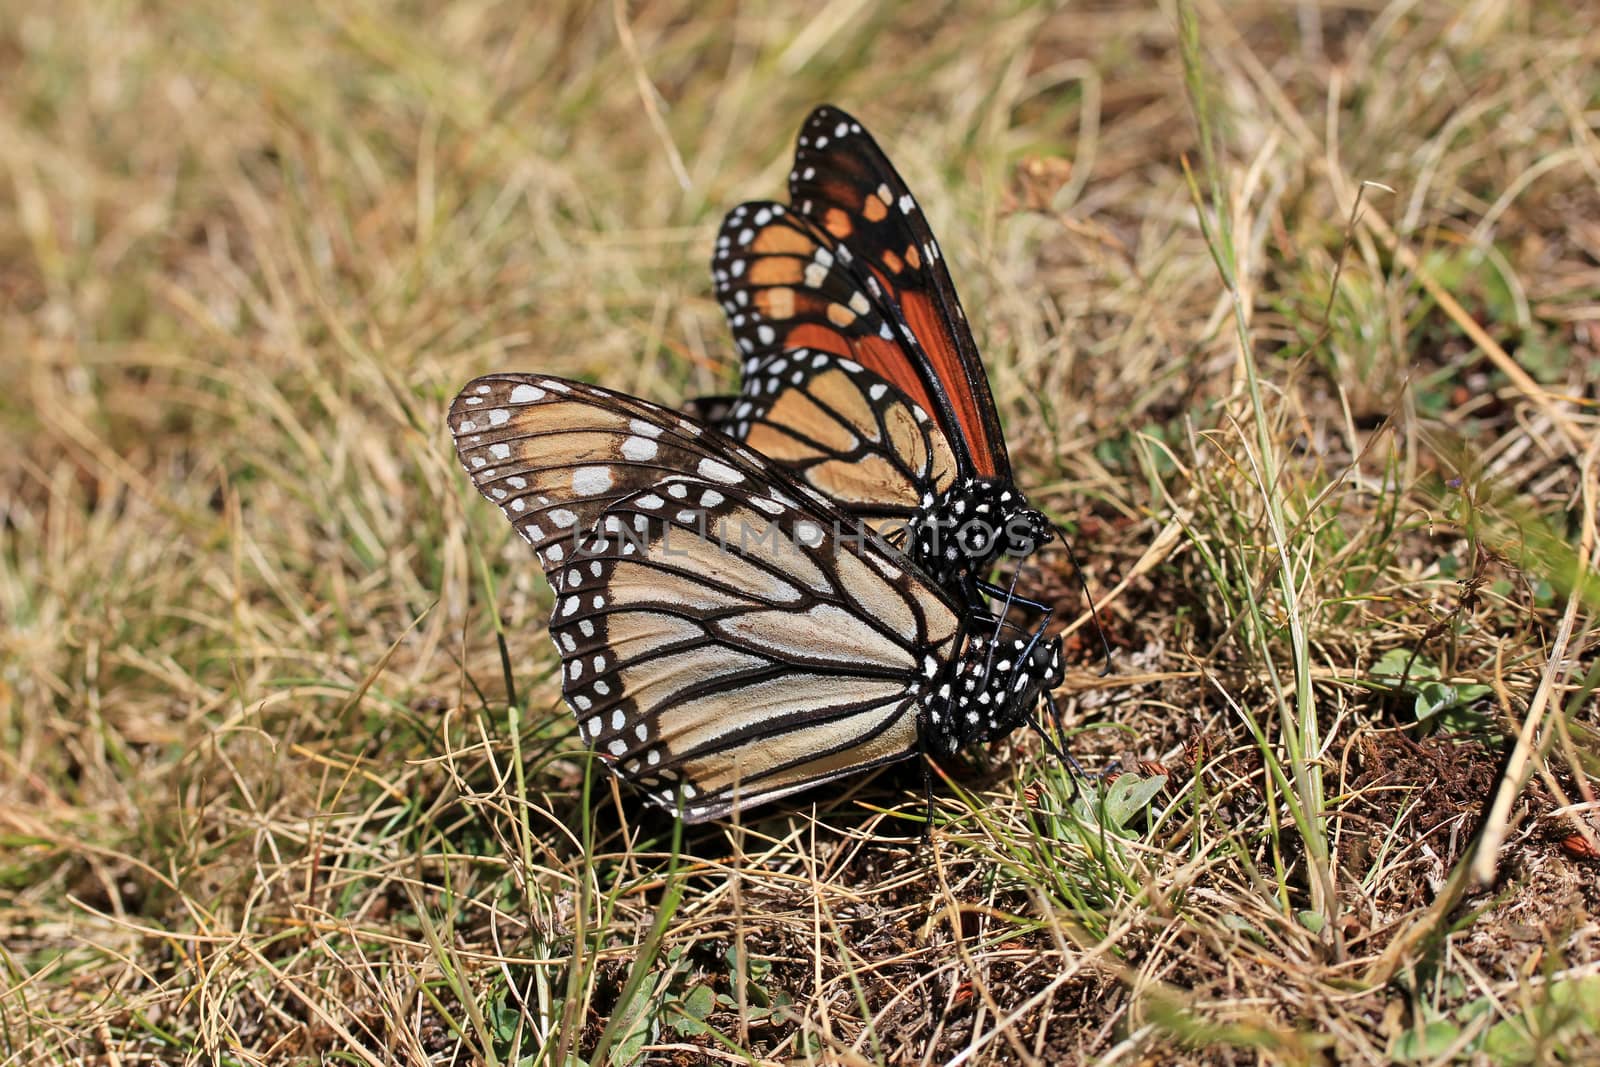 Monarch Butterflies mating in Michoacan, Mexico, millions are migrating every year and waking up with the sun.